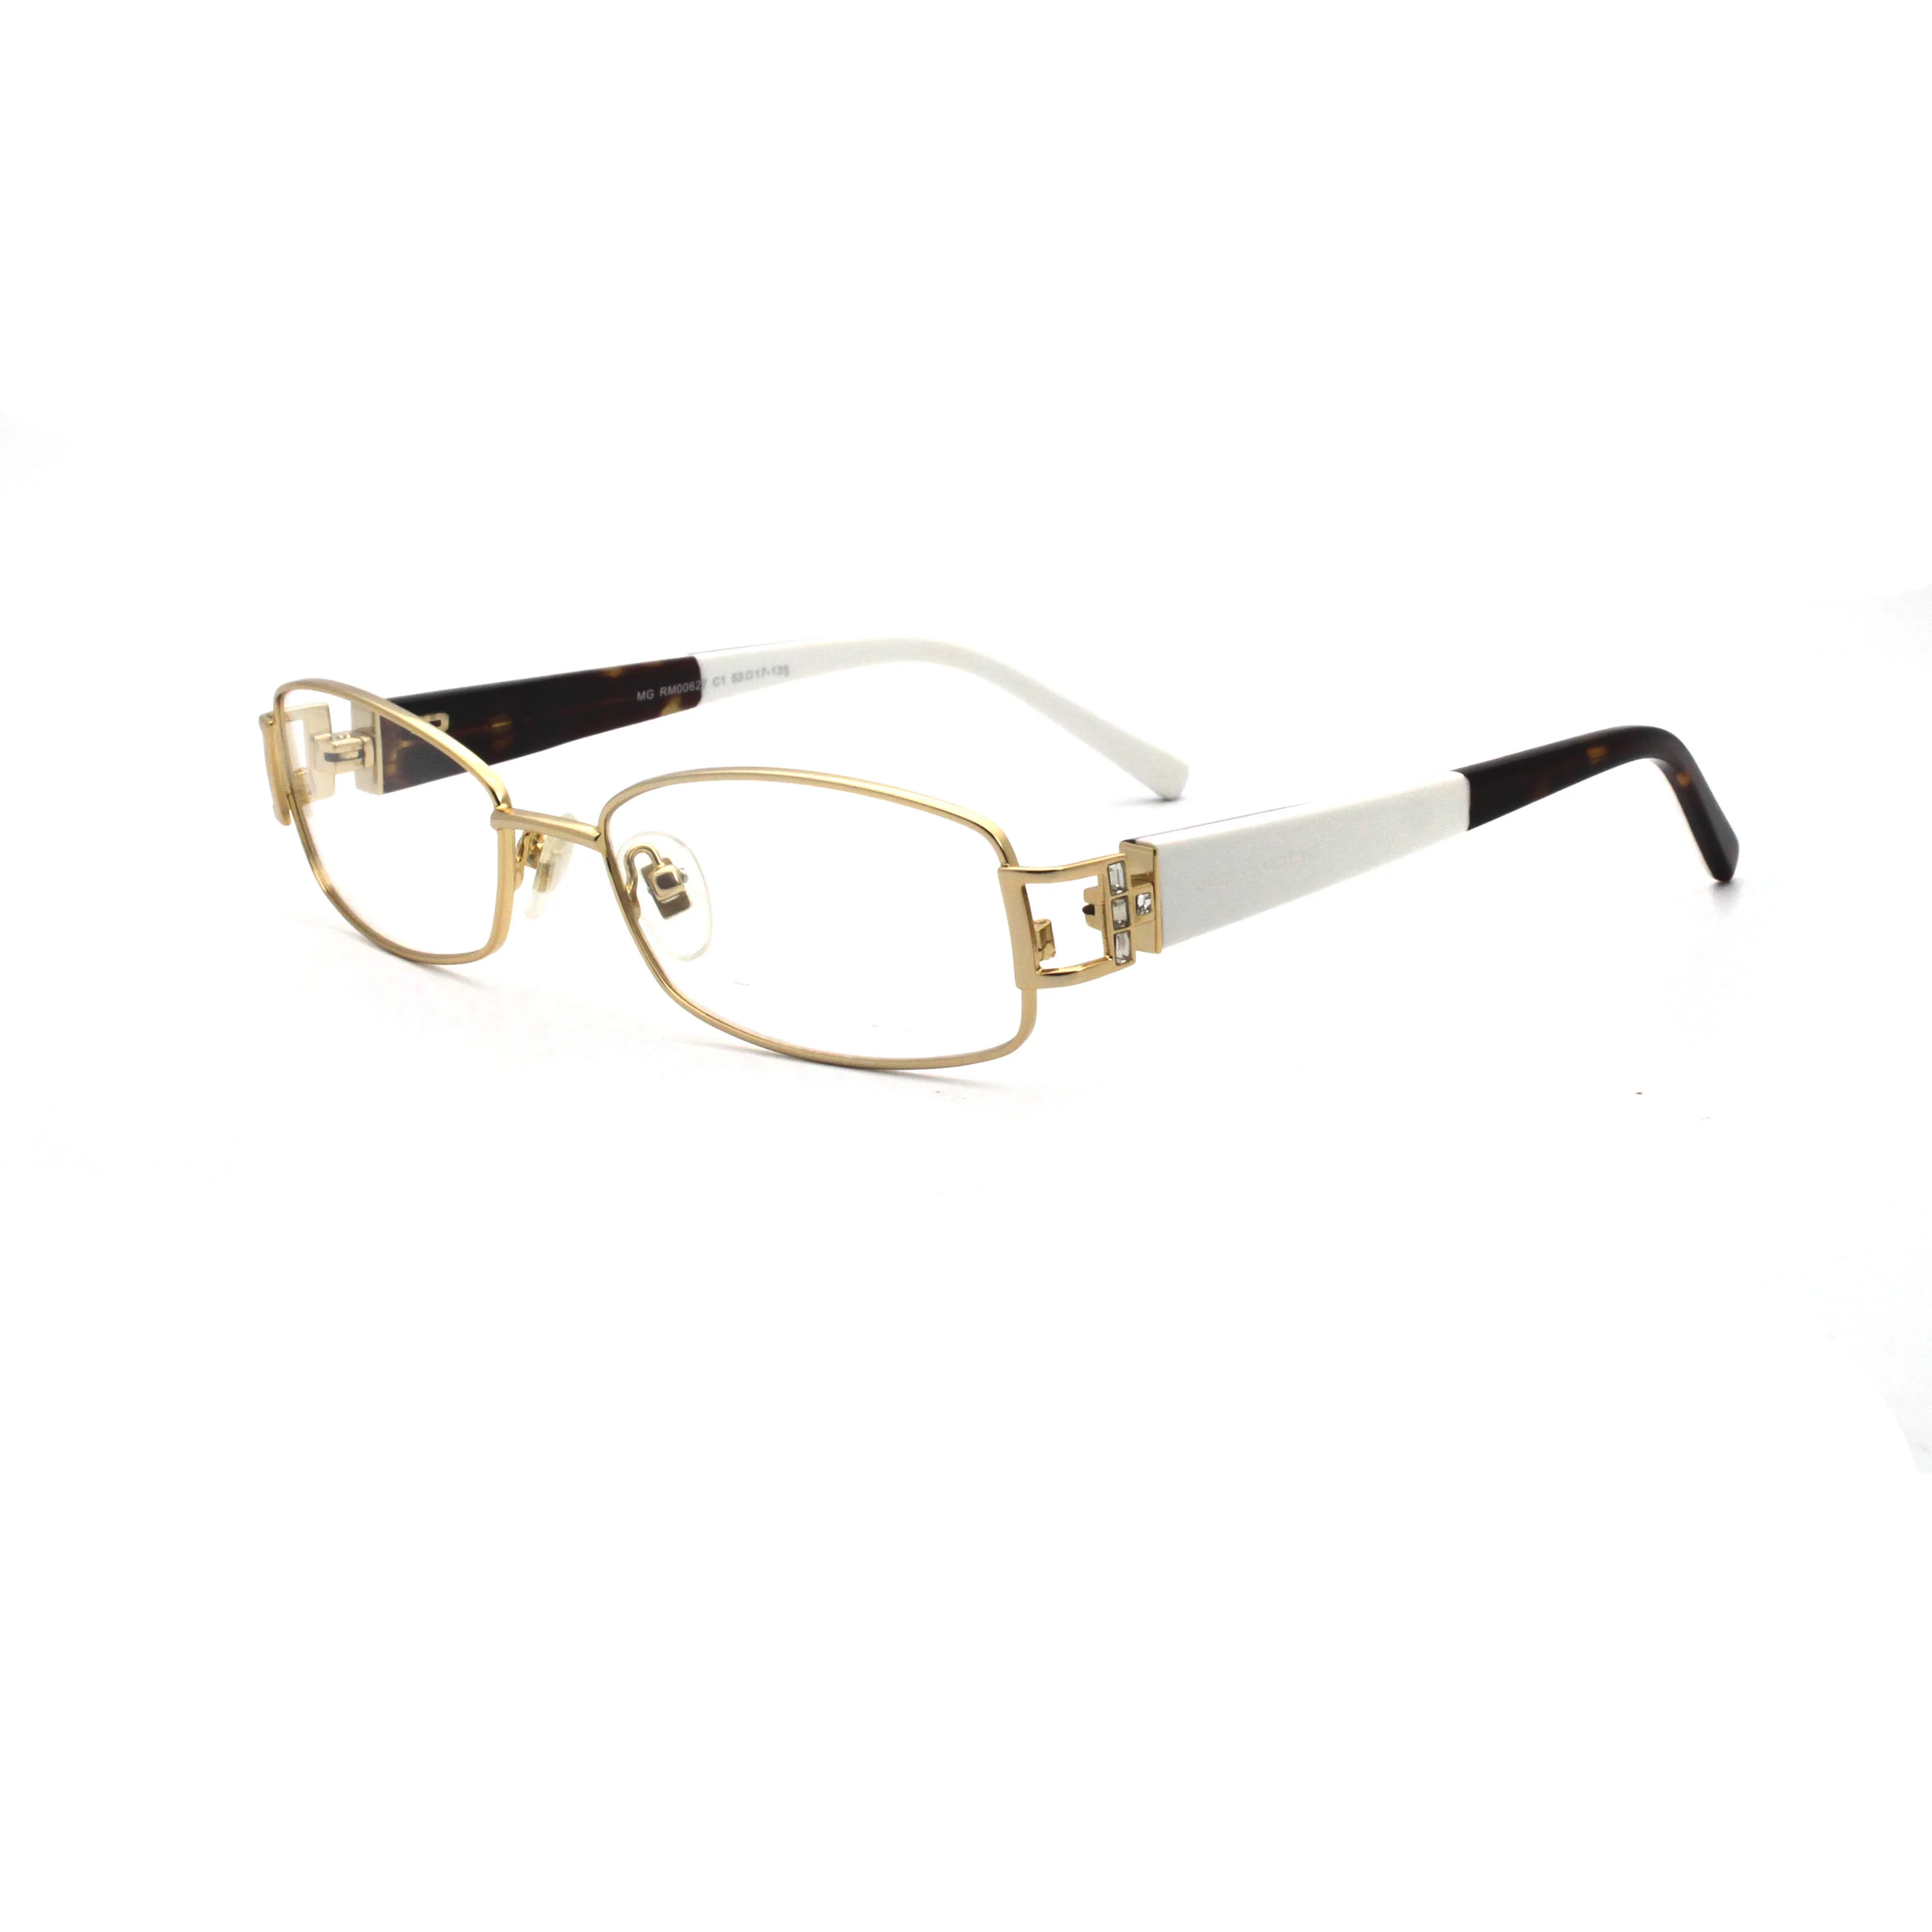 

New Fashion Italy Design Glasses For Men Black Stainless Steel with metal Eyeglasses Eyewear RM00627-C1